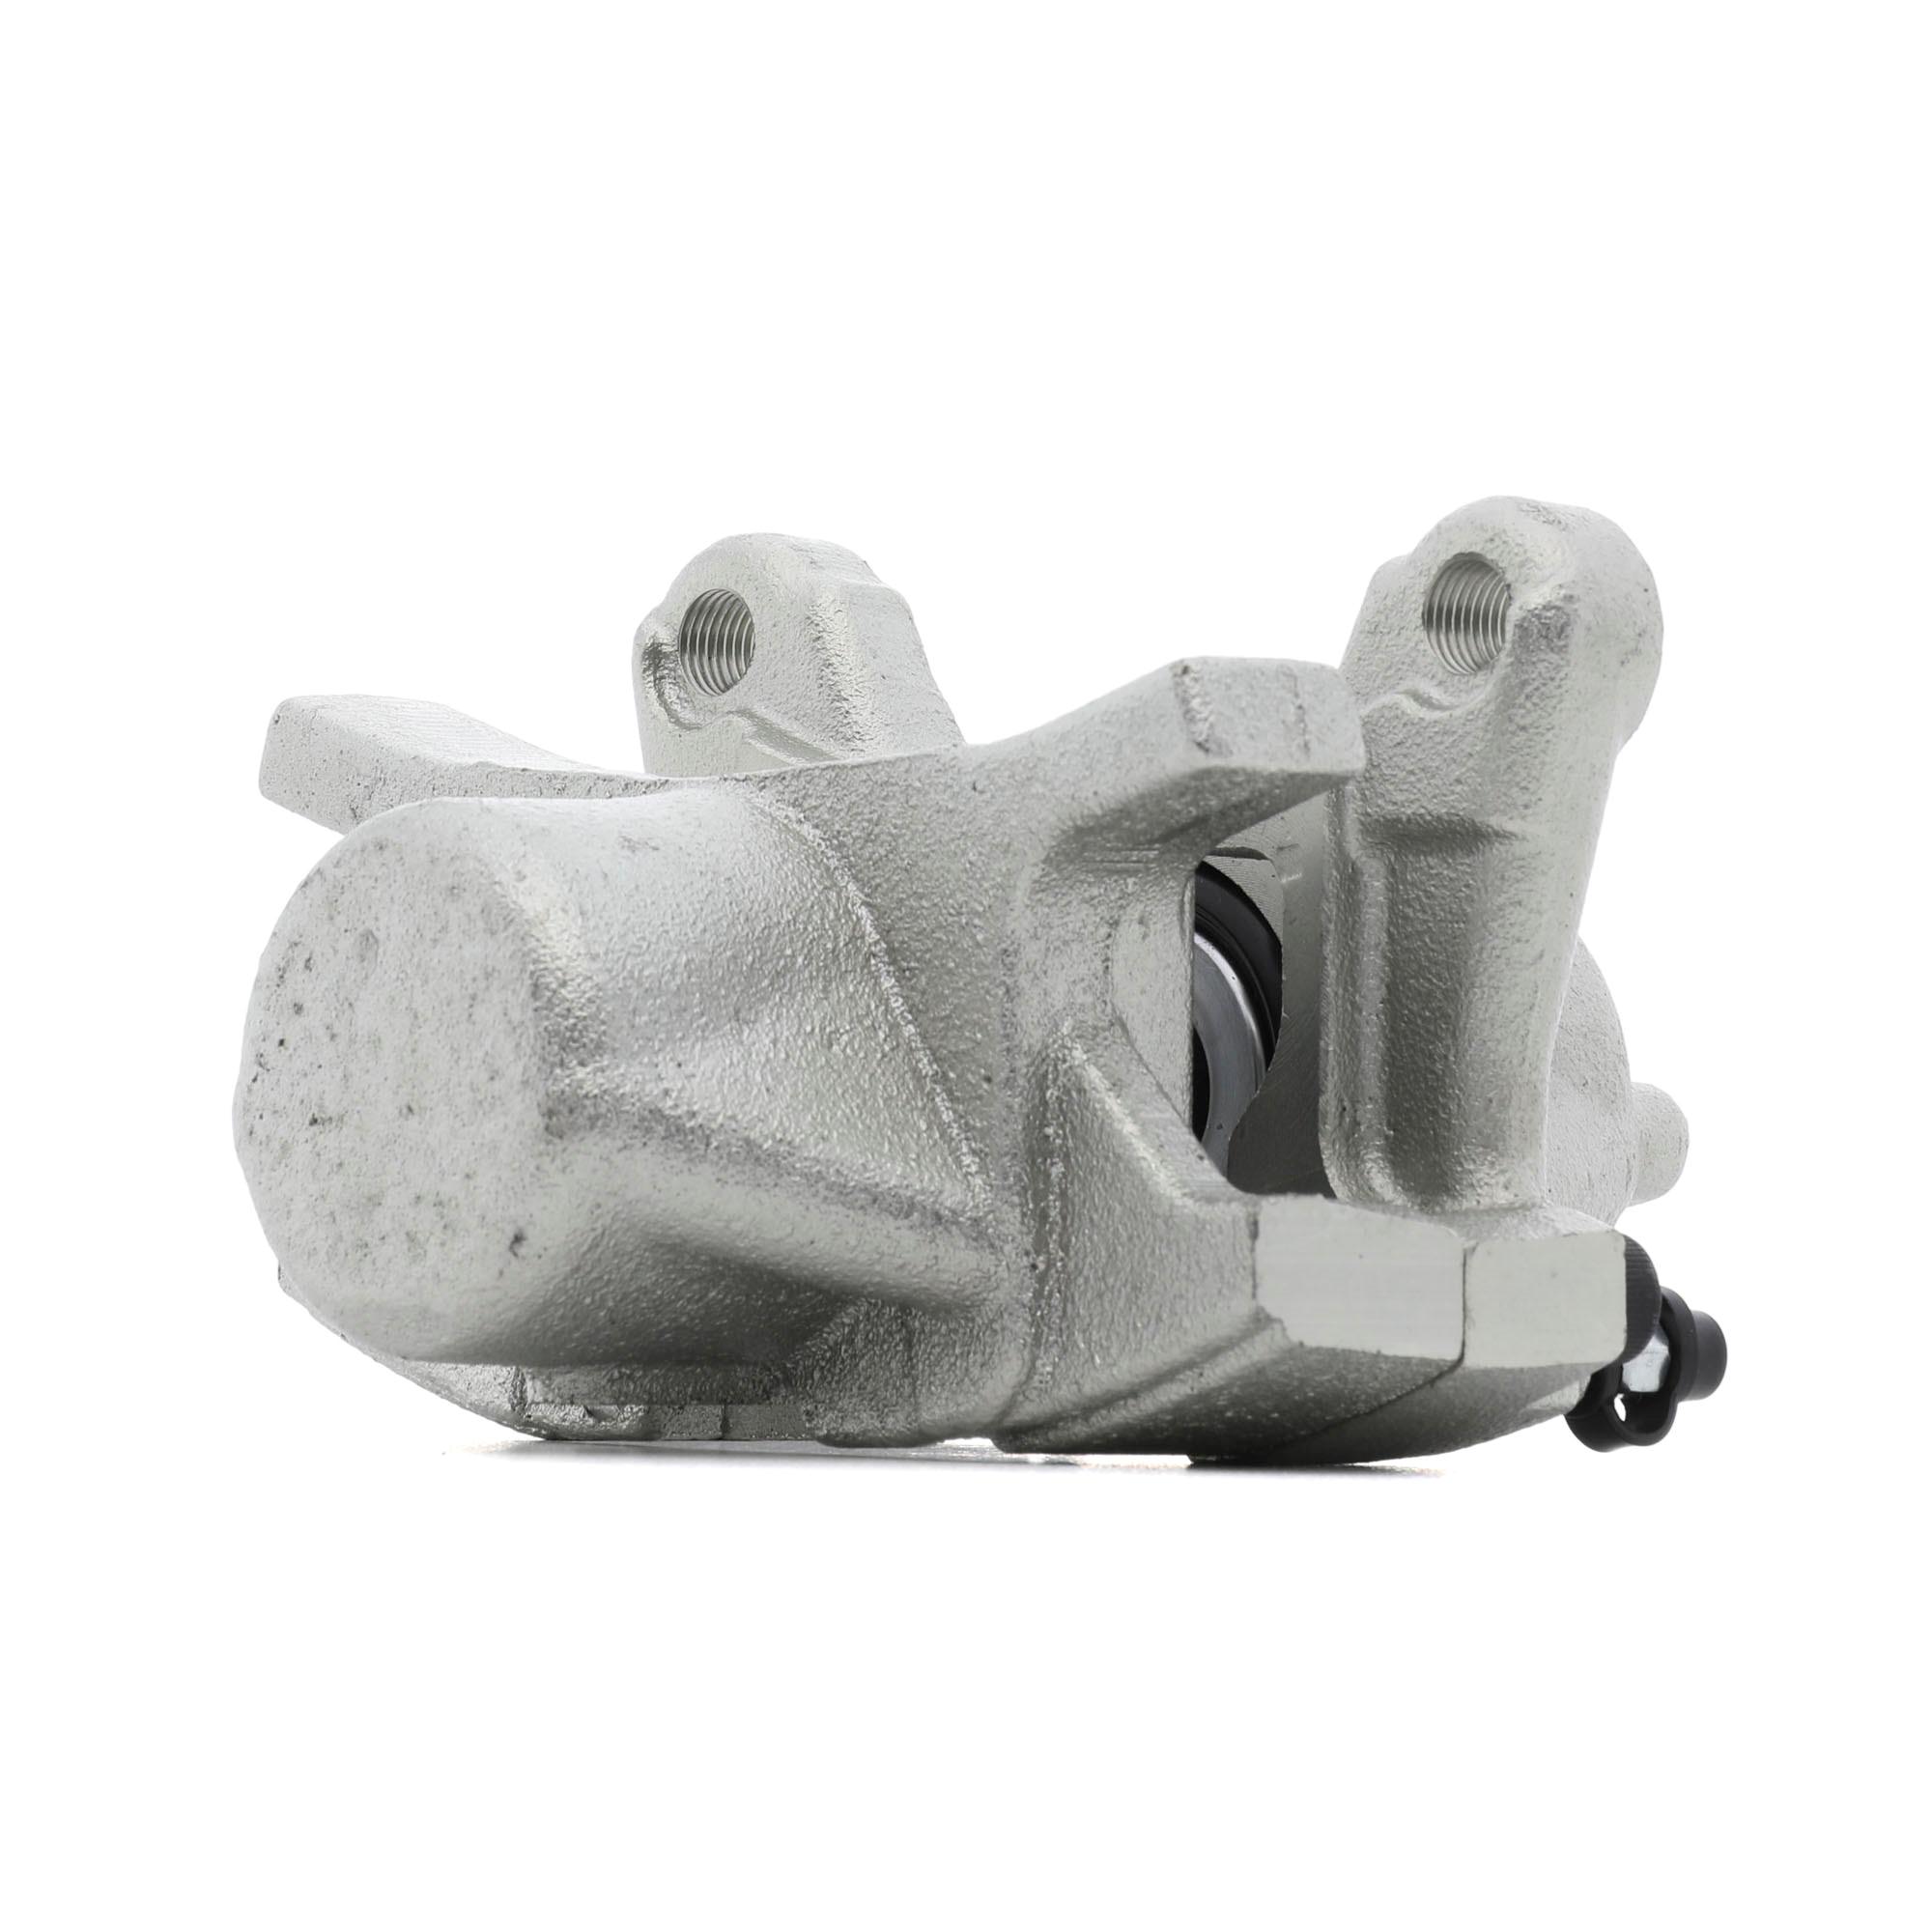 RIDEX 78B1010 Brake caliper Rear Axle Left, behind the axle, without holder, with holding frame